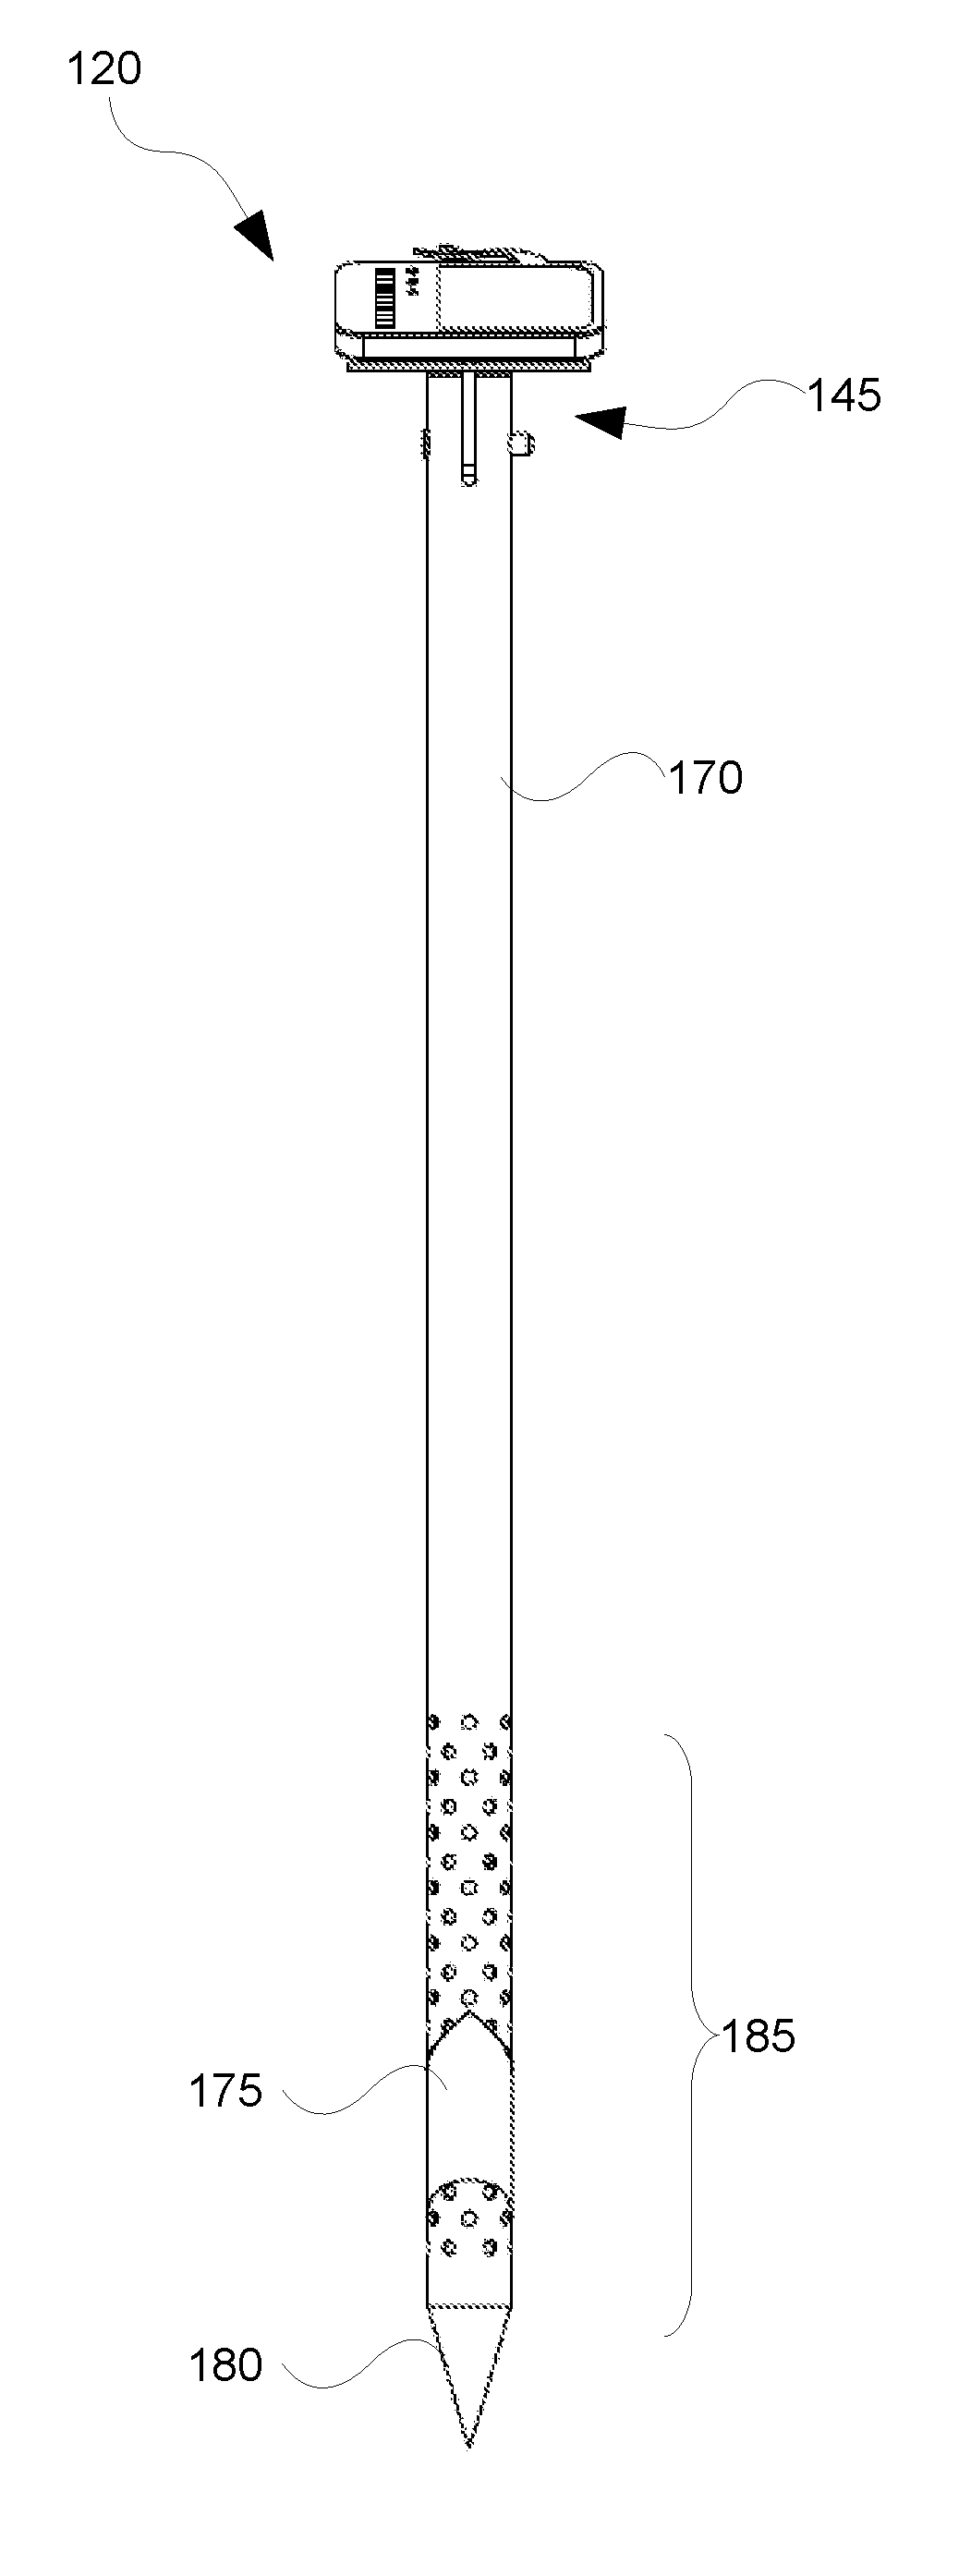 A process for producing a biocompatible soil mixture from cremated ash remains and ground penetrating apparatus therefor